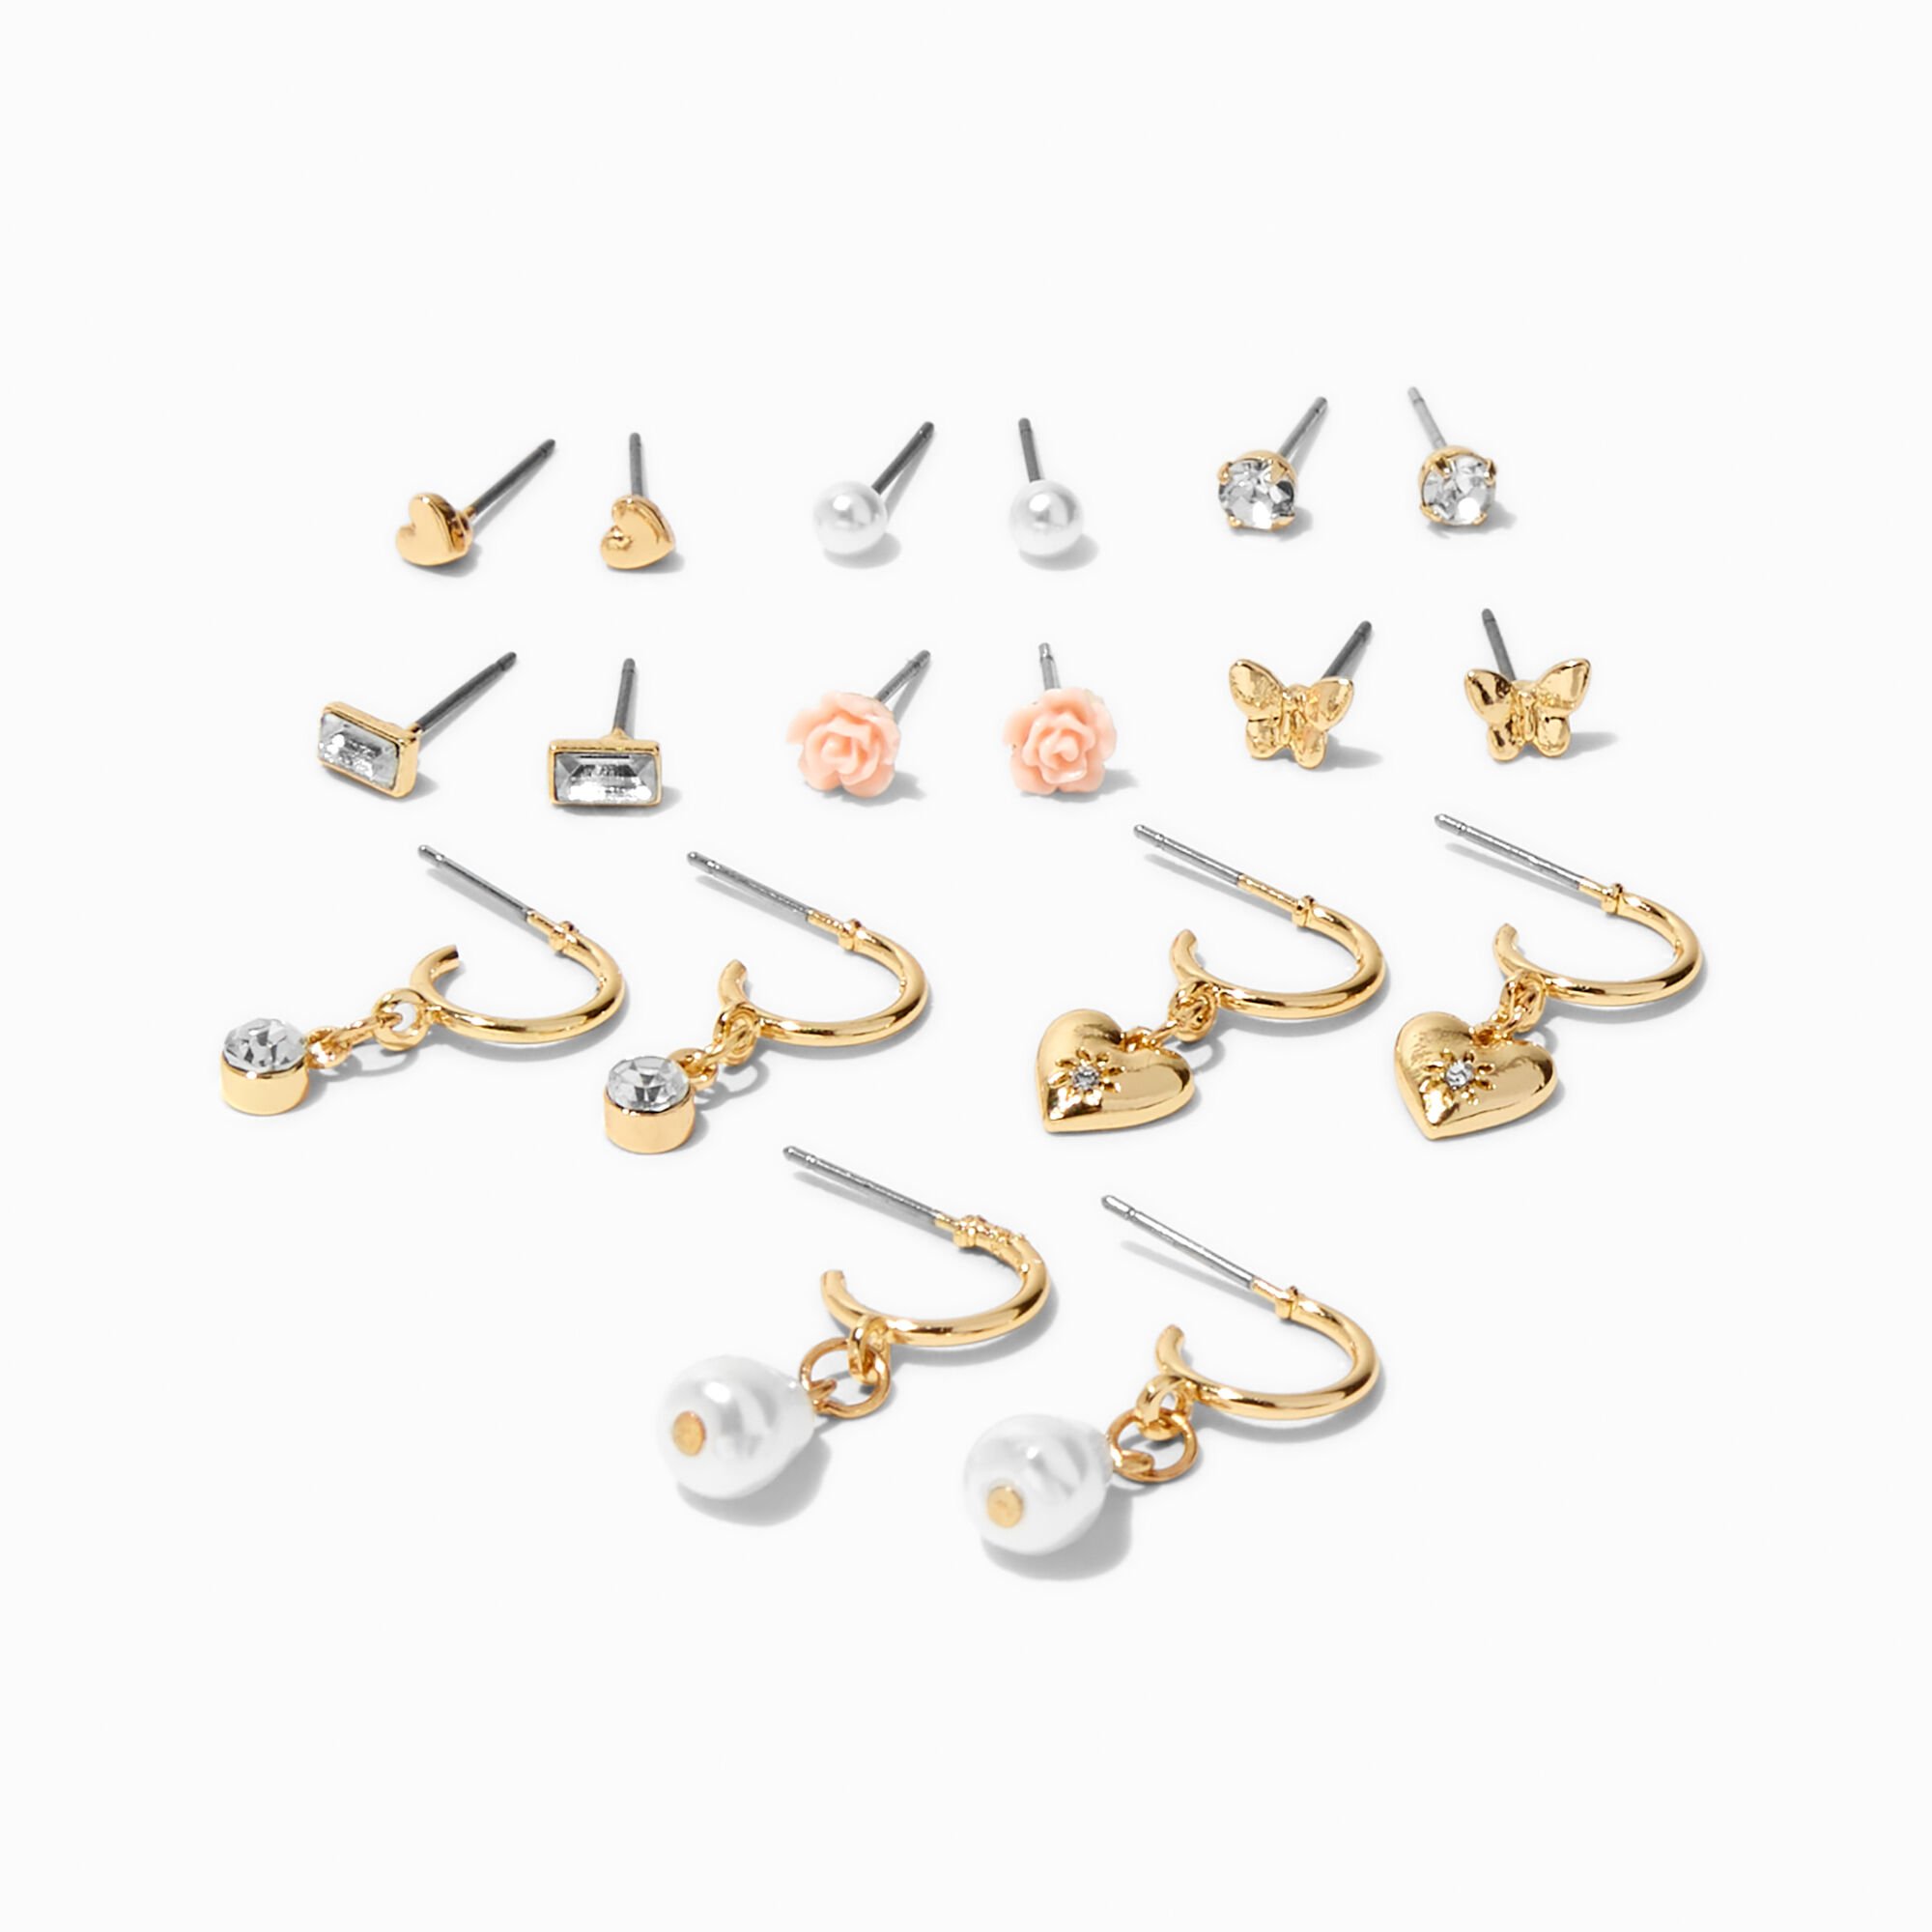 View Claires Pretty Hoops Studs Earrings Set 9 Pack Gold information